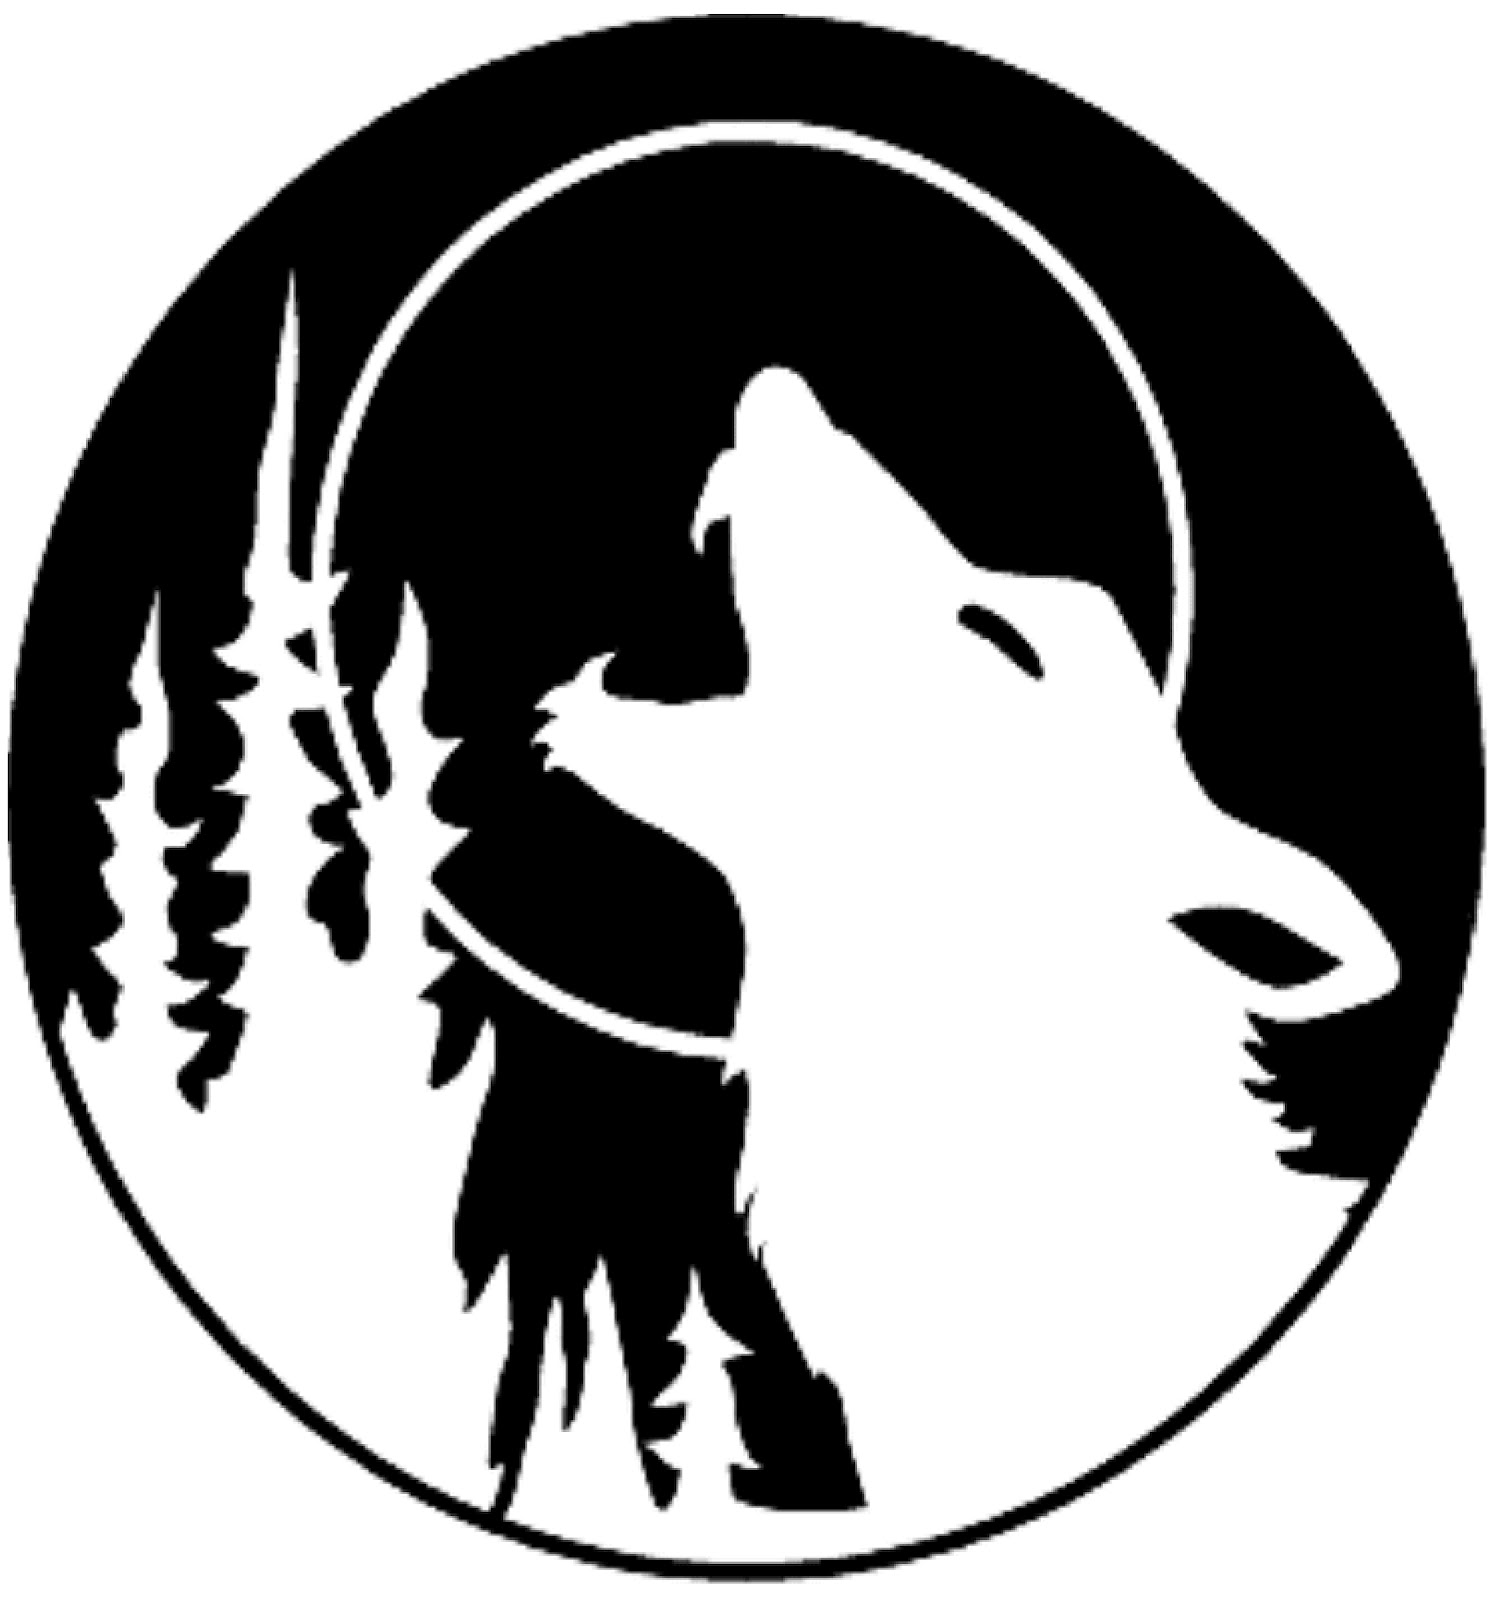 Wolf Howling At The Moon Pictures - ClipArt Best